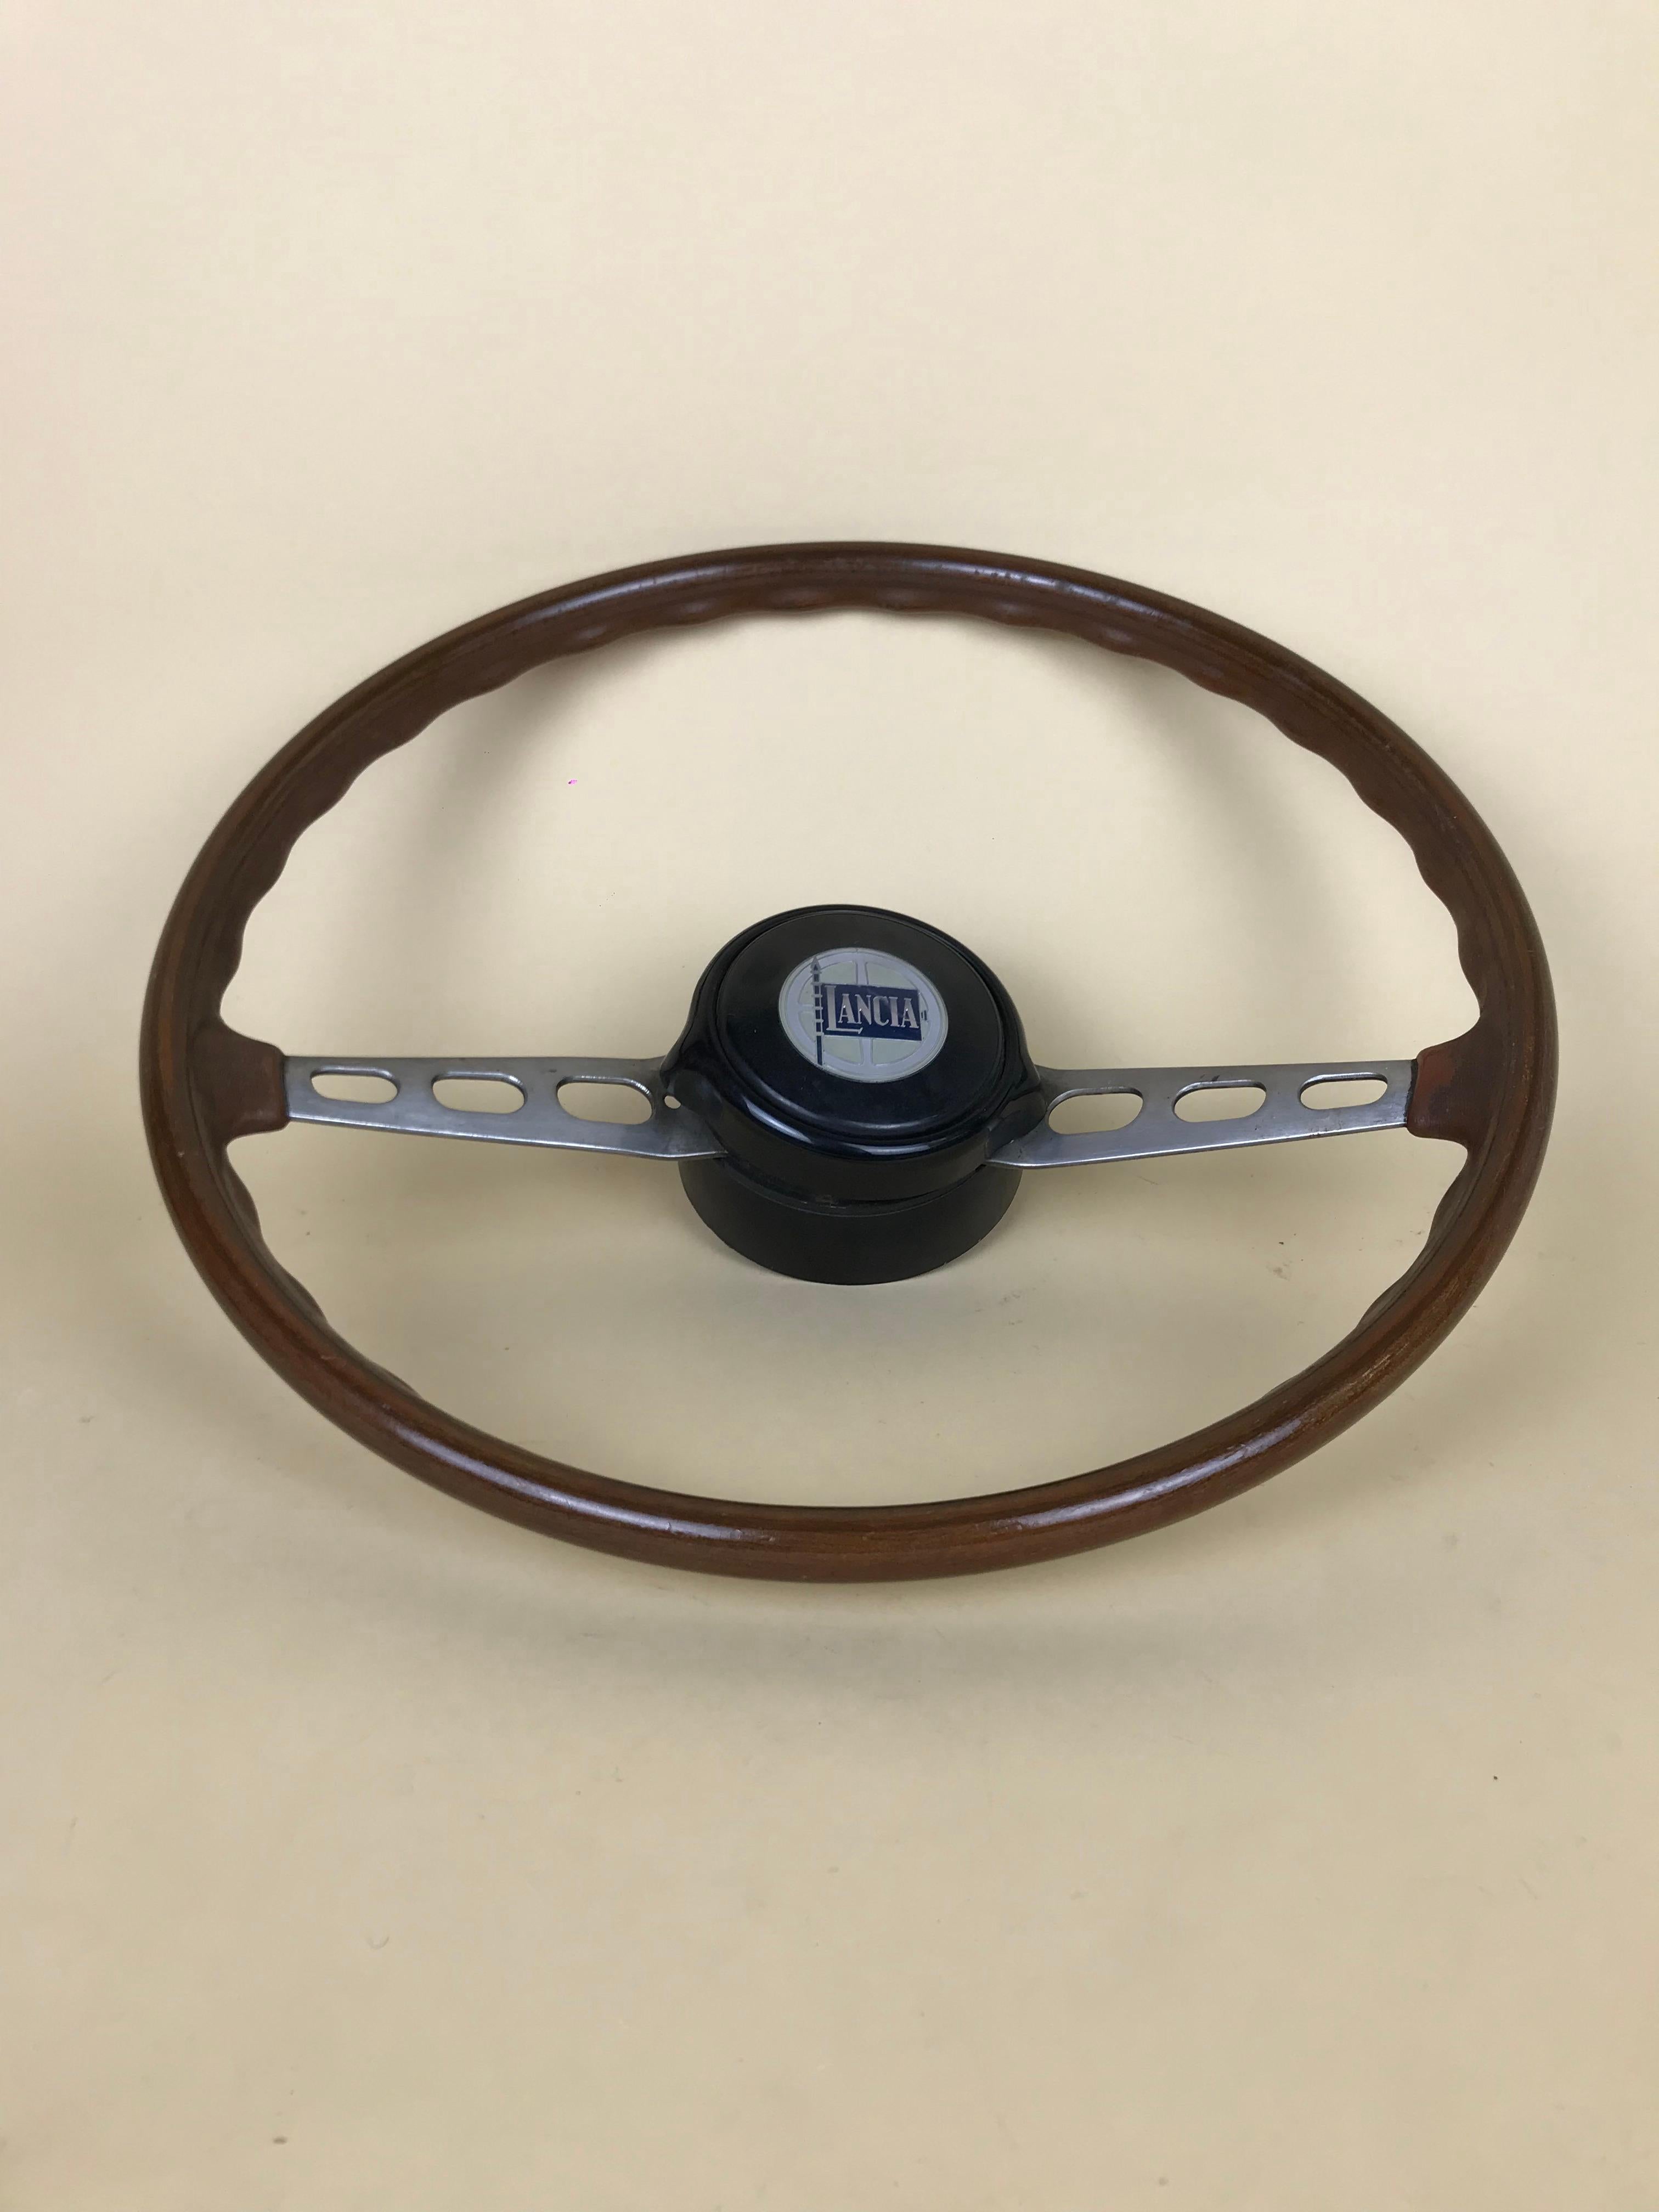 Mid-Century Modern 1960s Vintage Wooden and Metal Lancia Steering Wheel Made in Italy For Sale